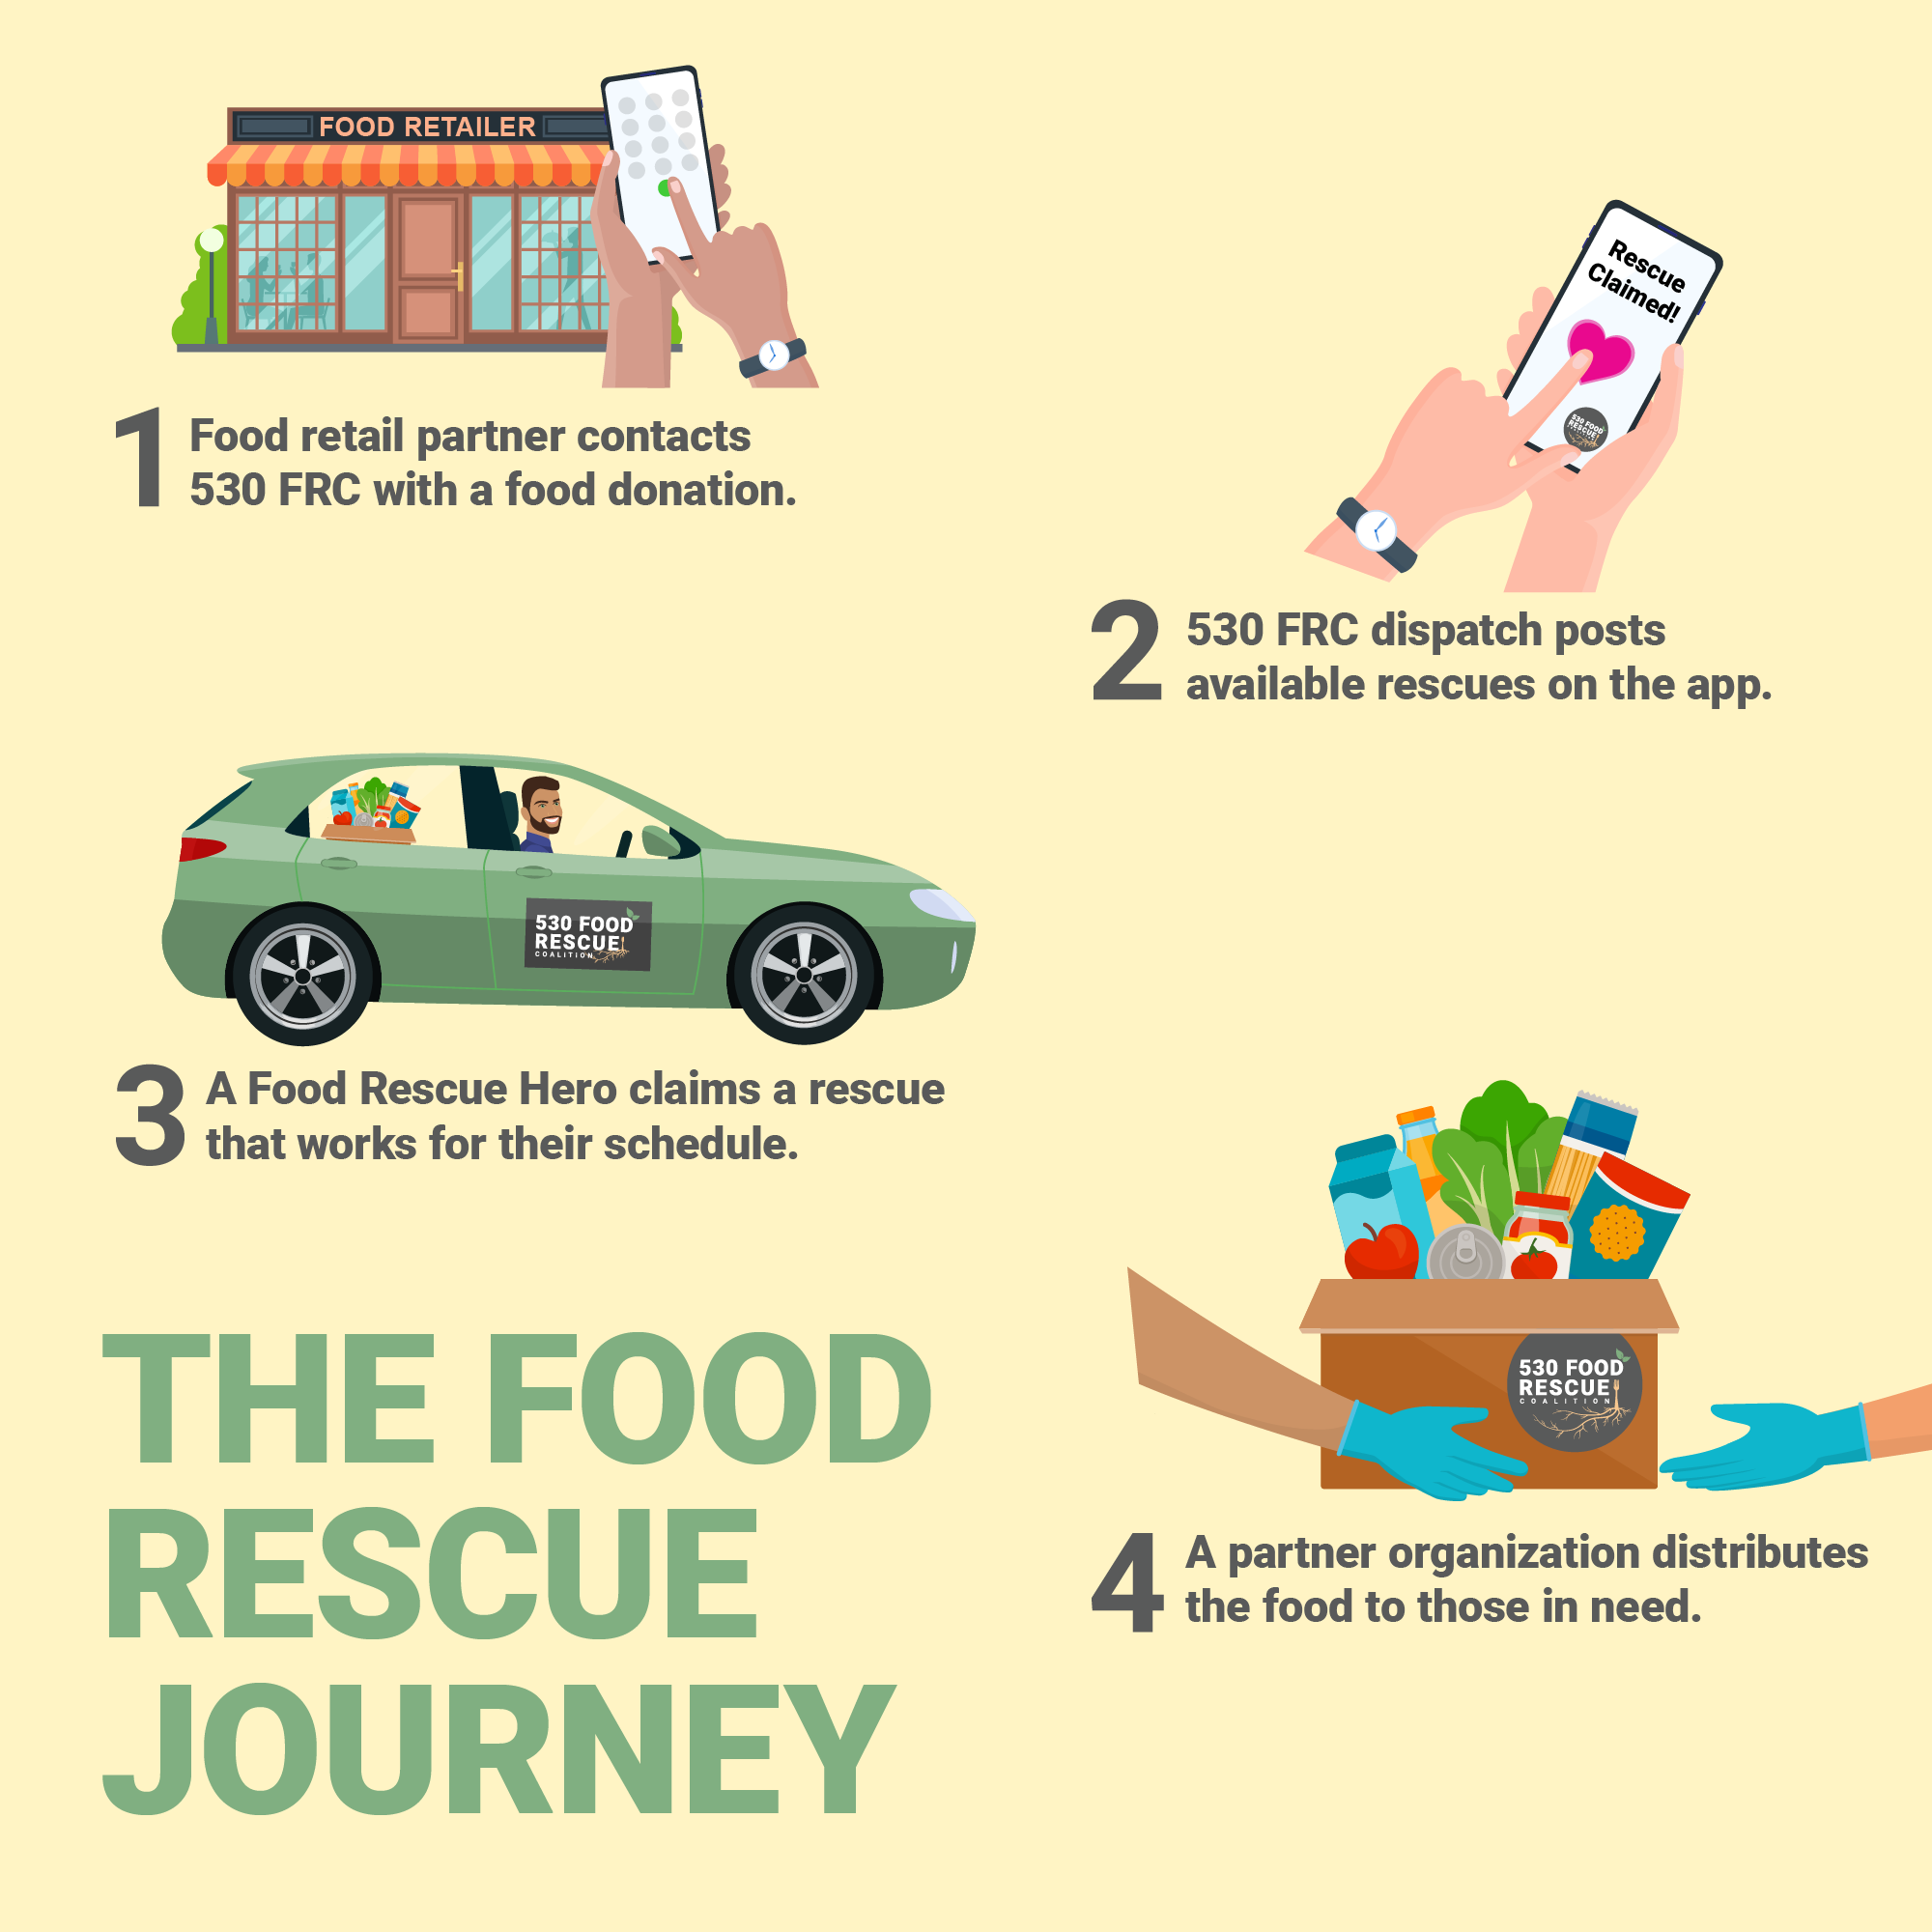 The food rescue journey steps 1 through 4